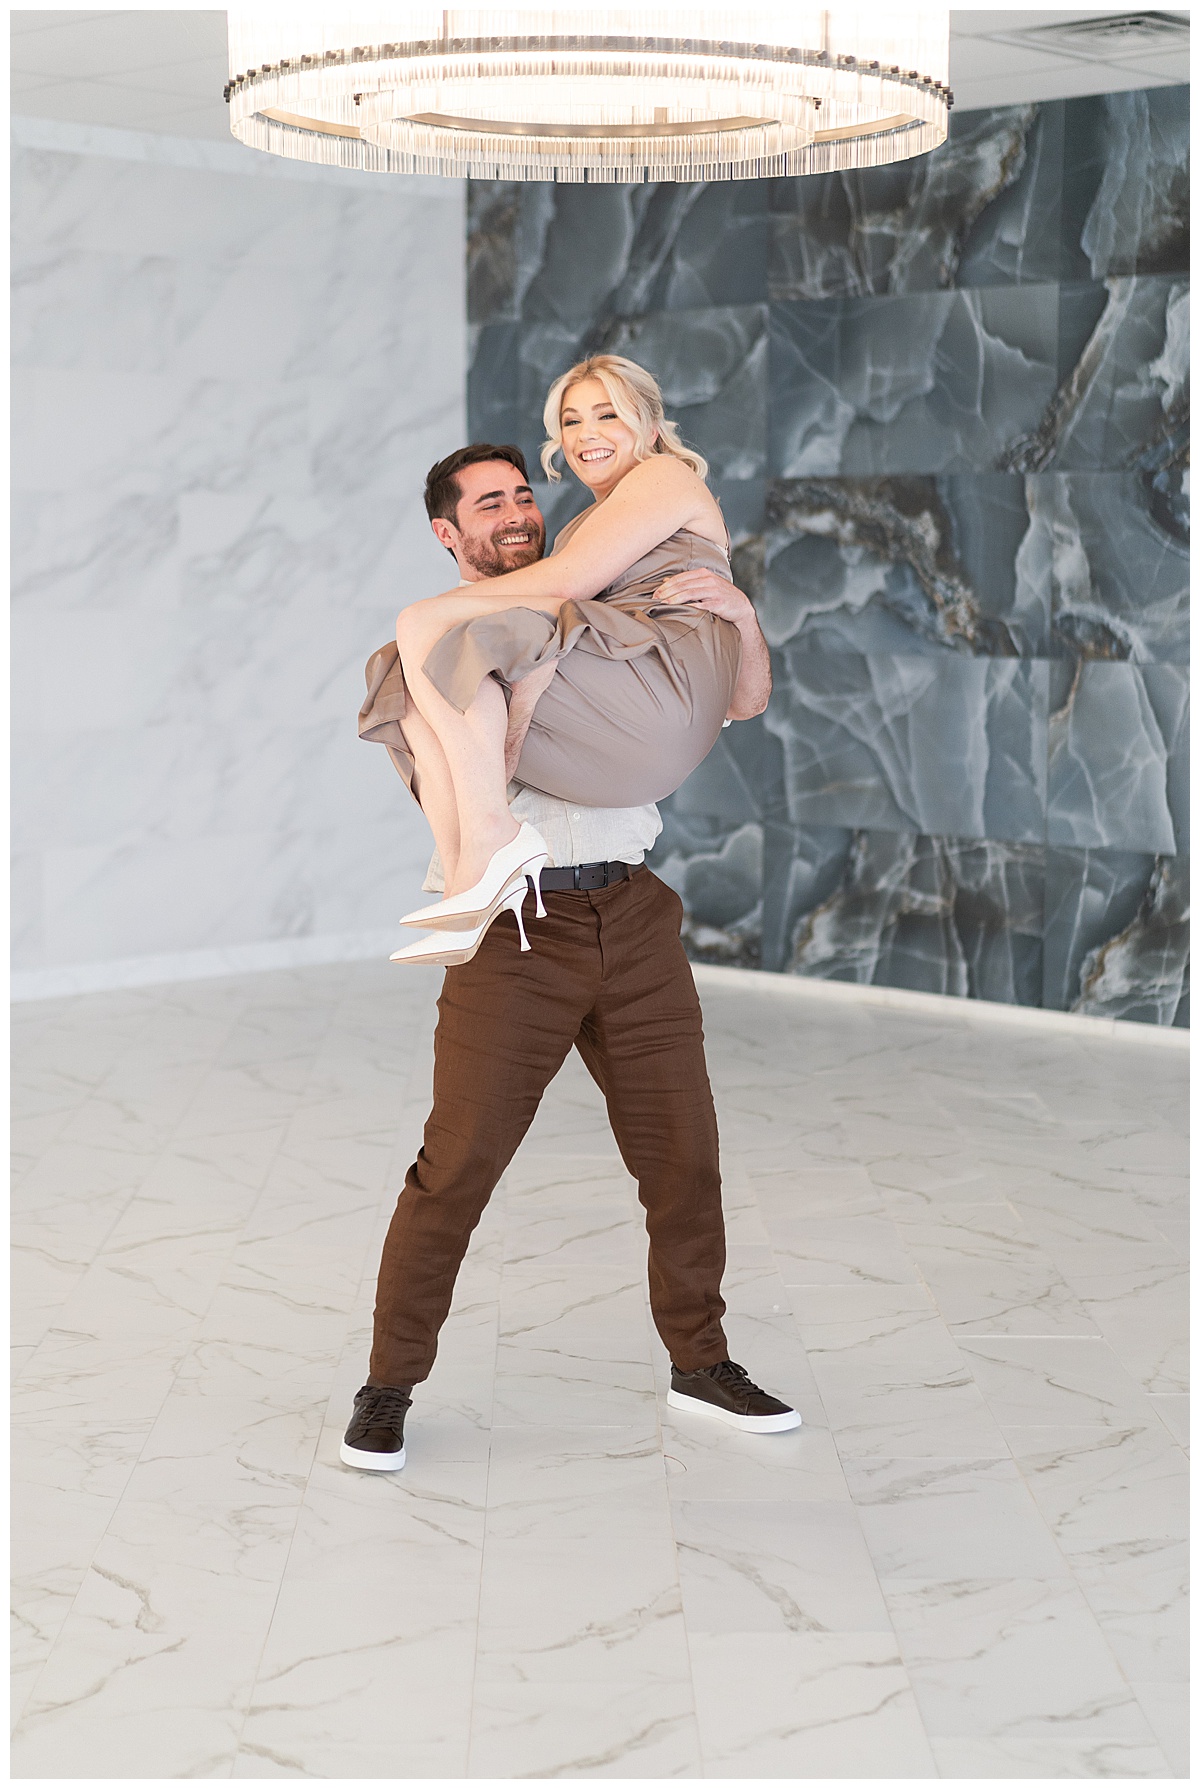 Man carries woman for Houston Engagement Photographer